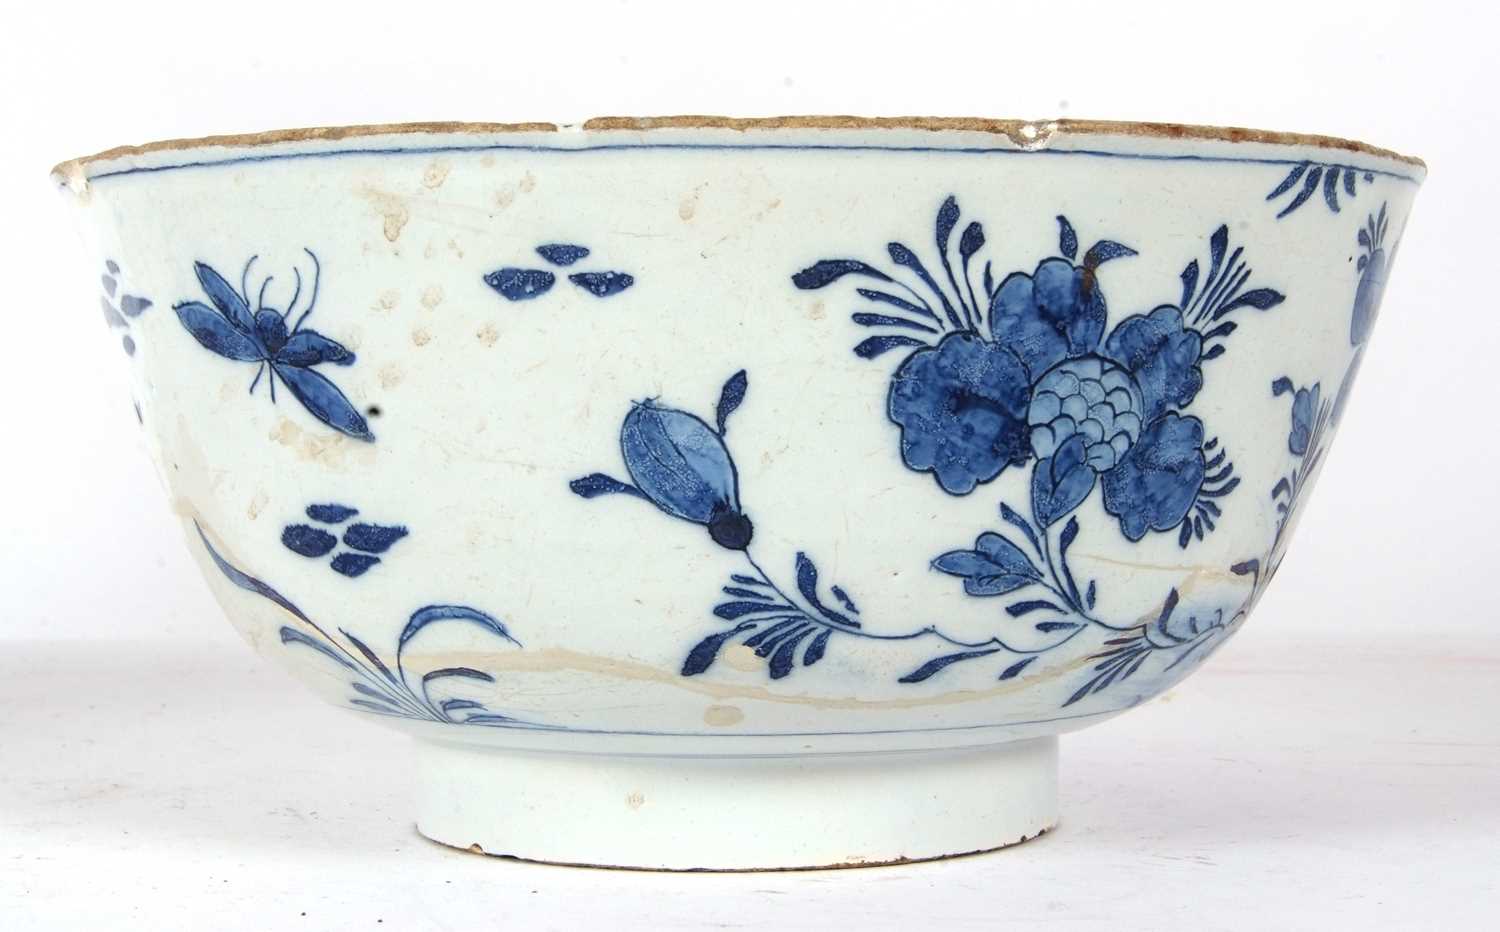 An early 18th Century English Delft punch bowl, circa 1730 with blue and white Chinese porcelain - Image 3 of 6